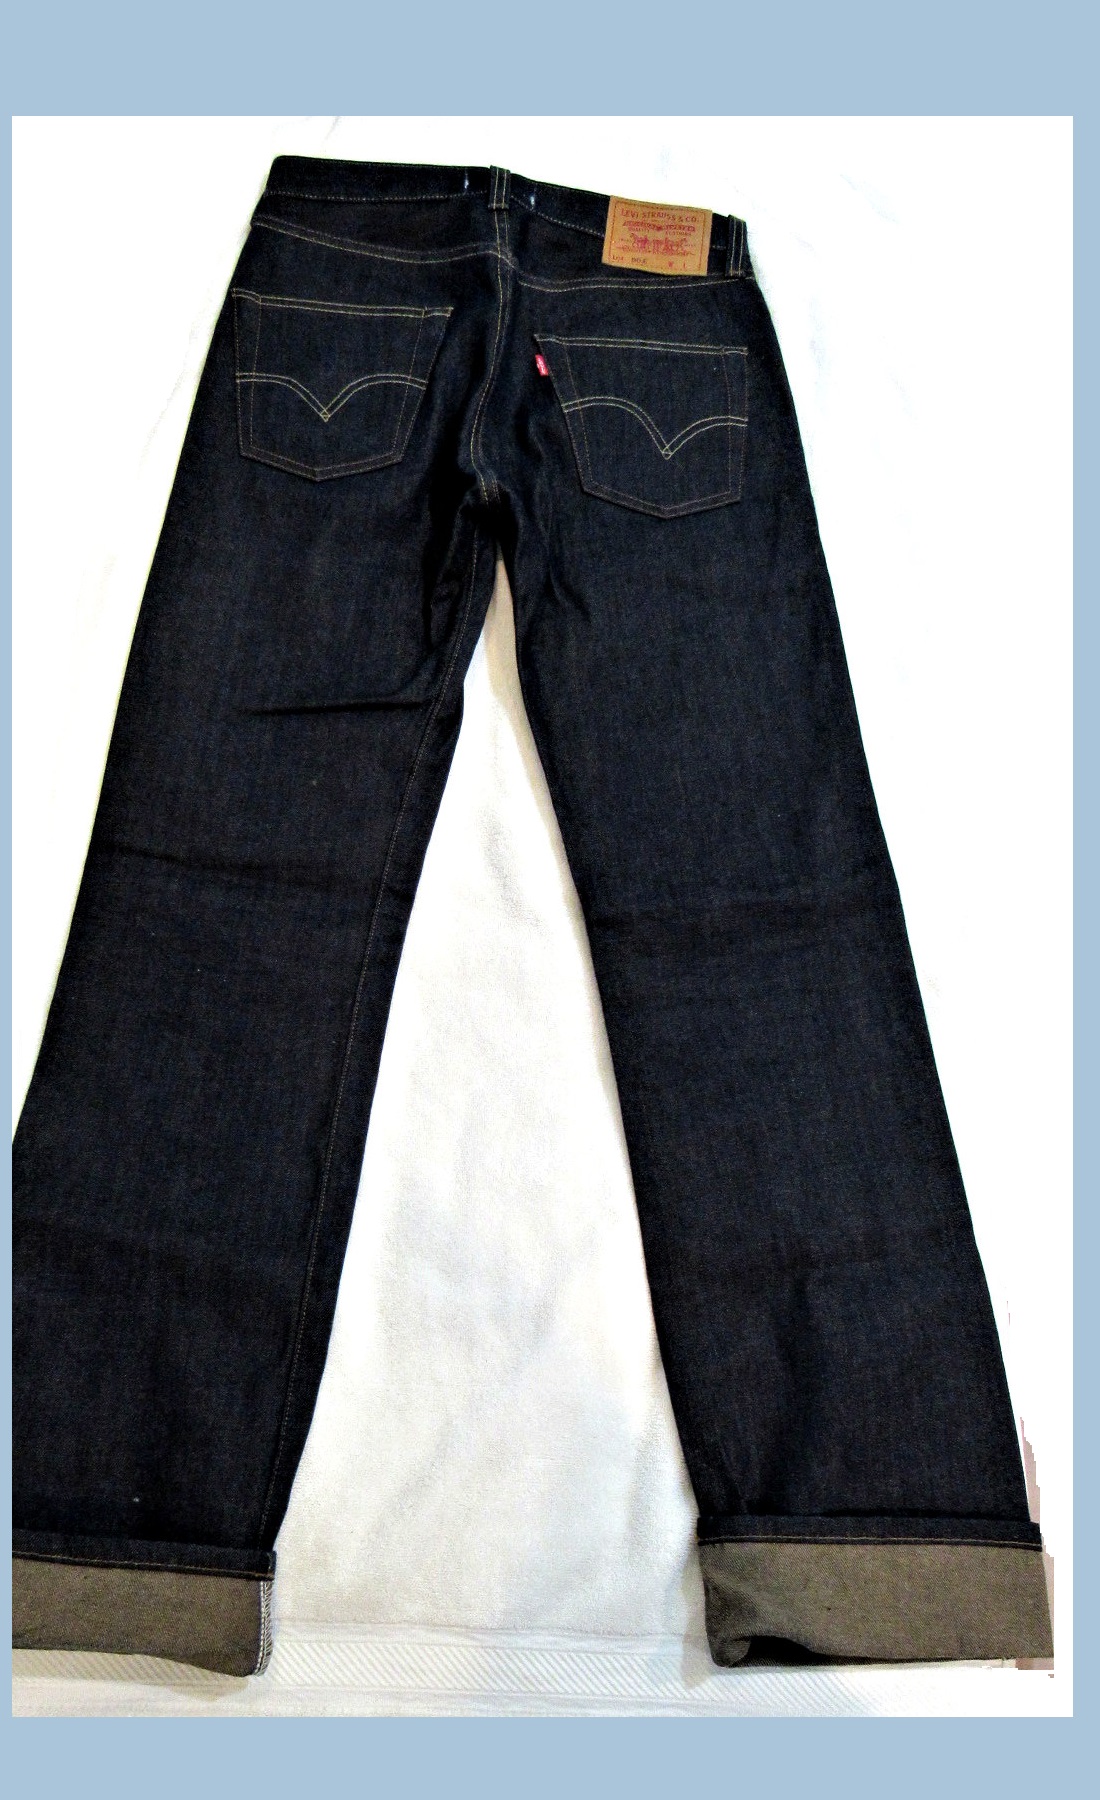 Levi's Limited Edition 501 Jeans